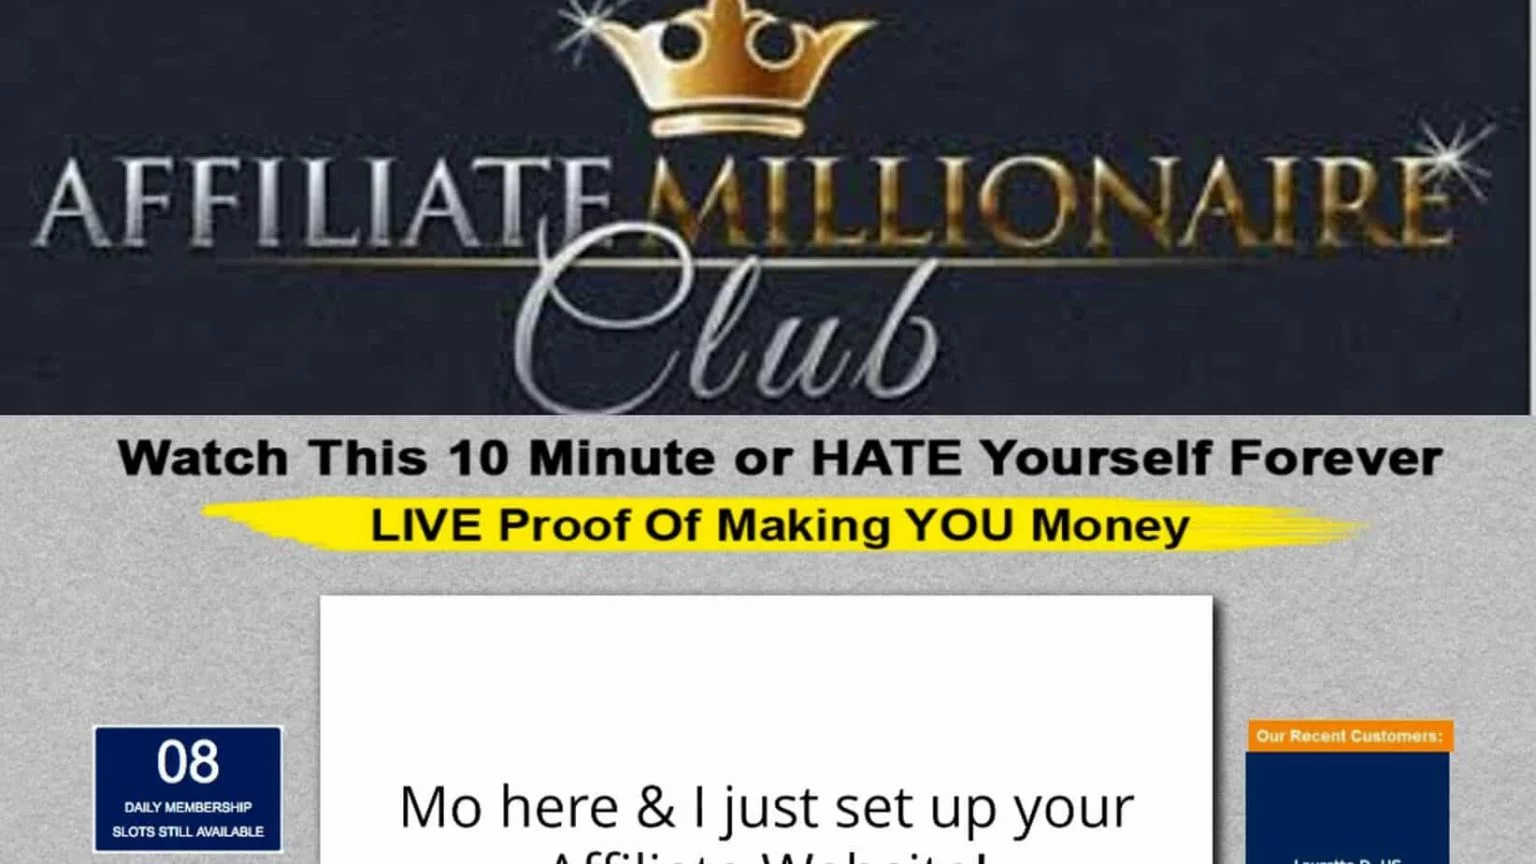 Affiliate Millionaire Club How Does It Work